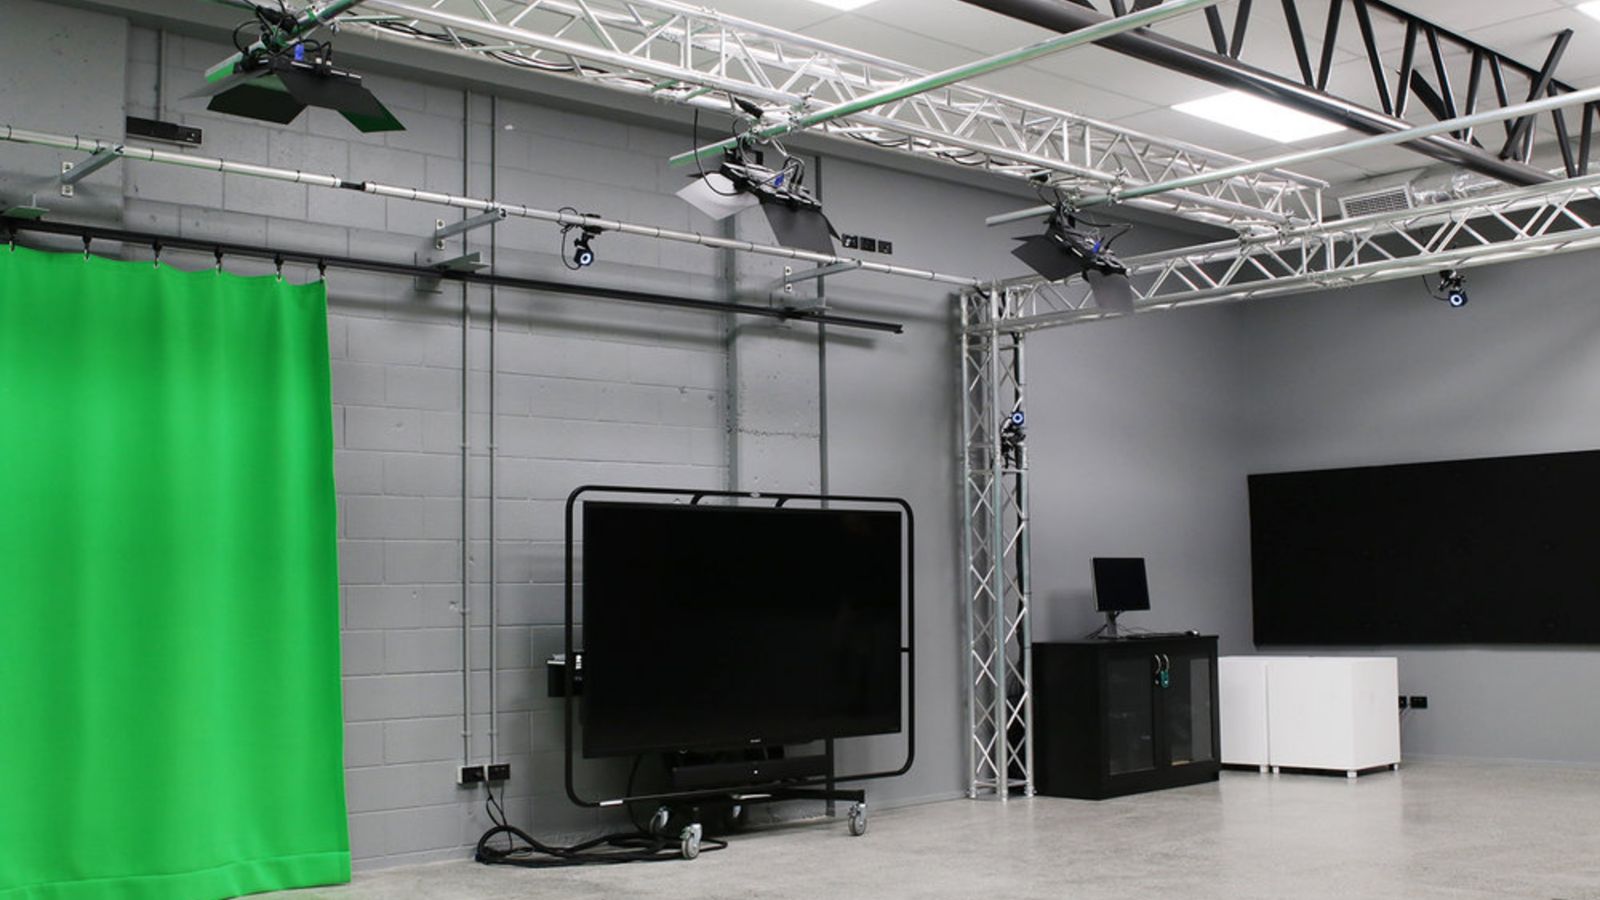 Studio with grey walls, green curtain, large screens.